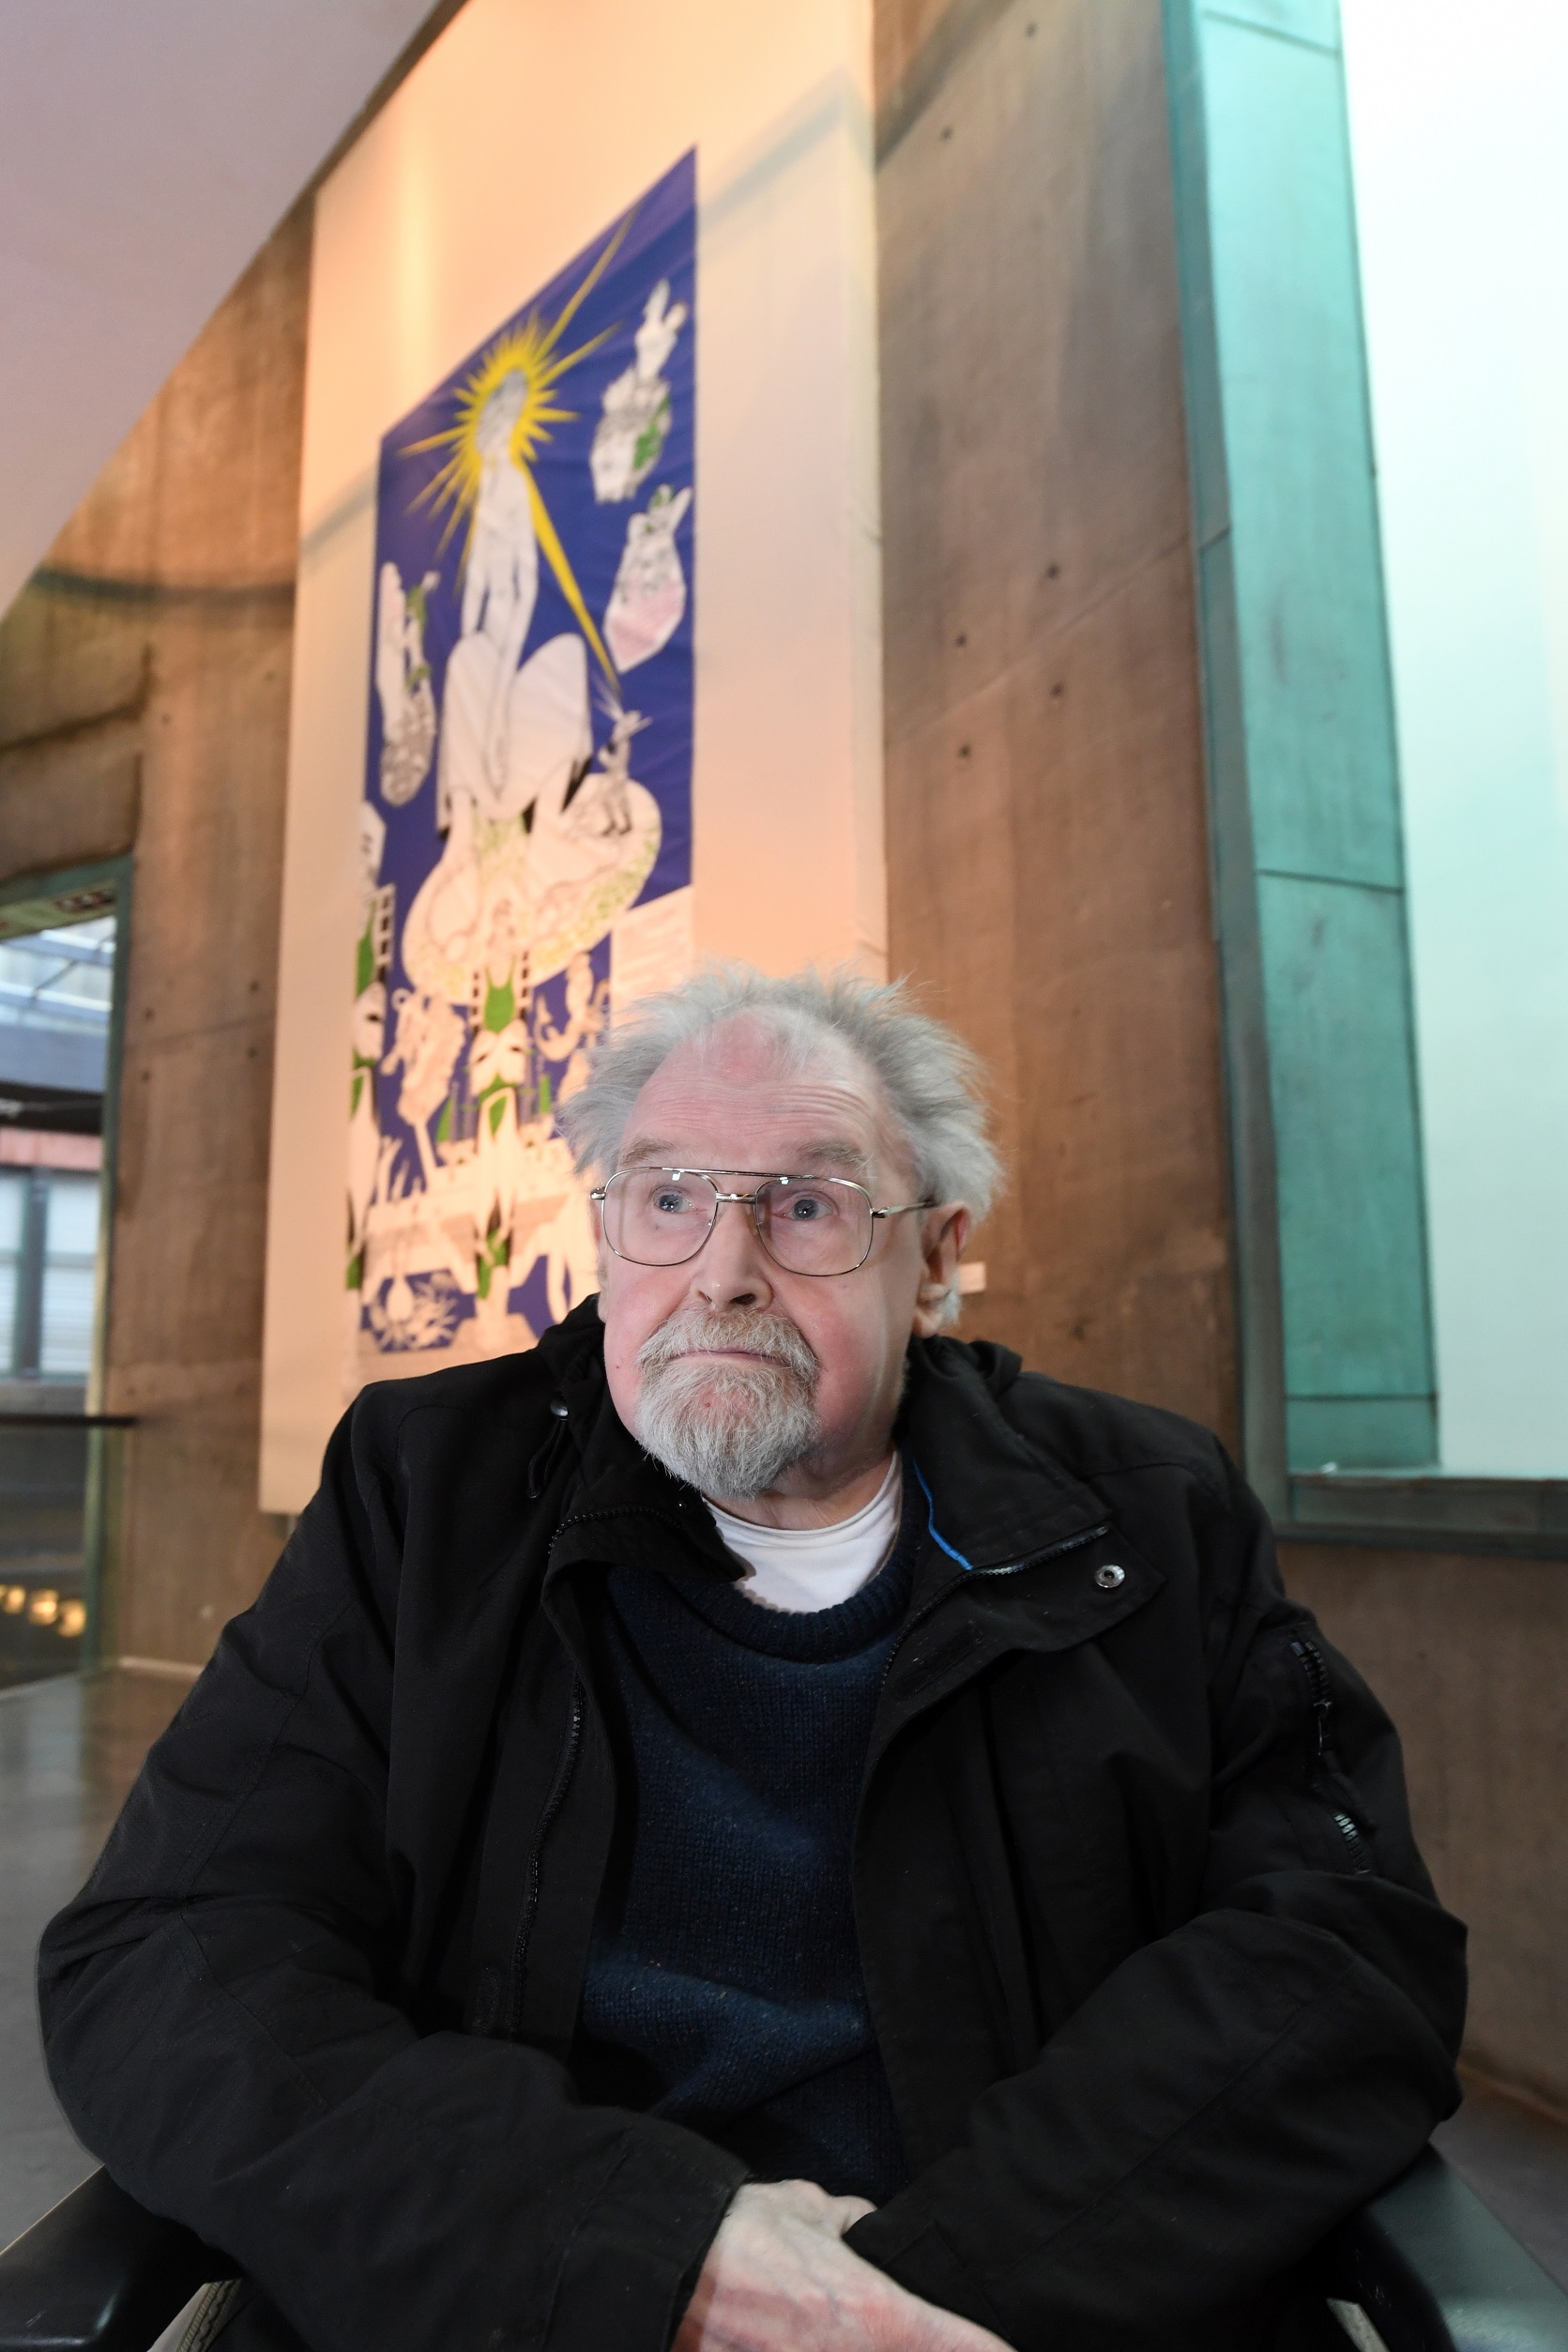 Alasdair Gray at the unveiling of the Facsimilization exhibition at The Lighthouse in Glasgow (Glasgow City Council/PA)